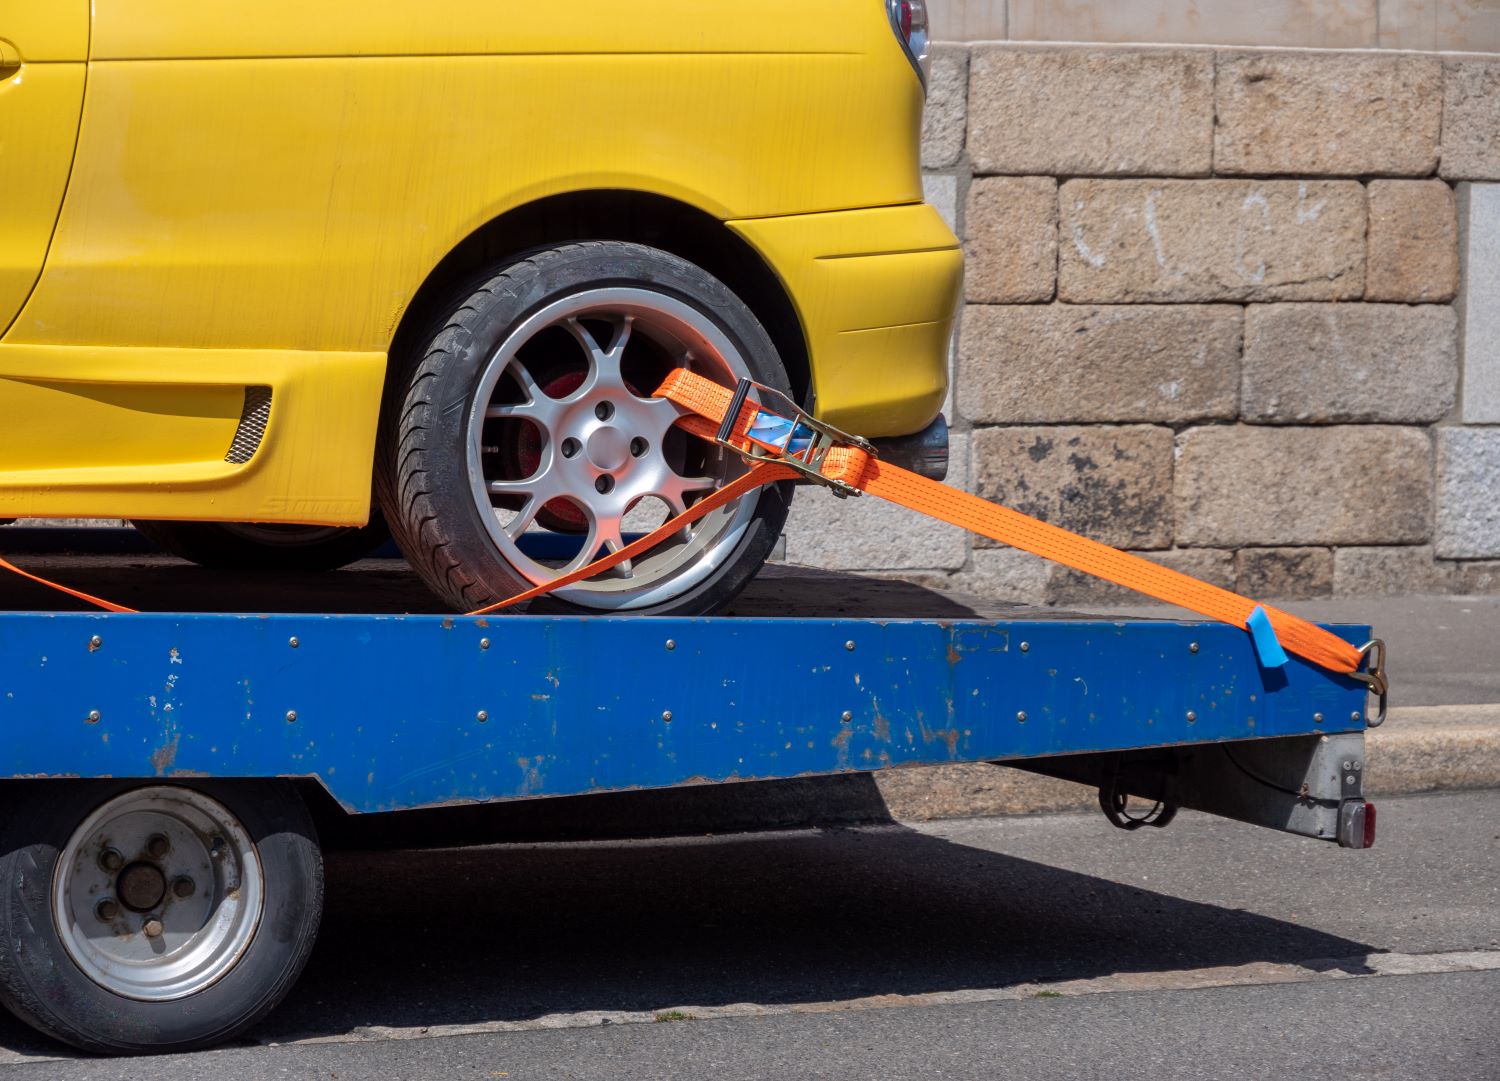 Towing My Vehicle: Tow Dolly or Auto Transport?